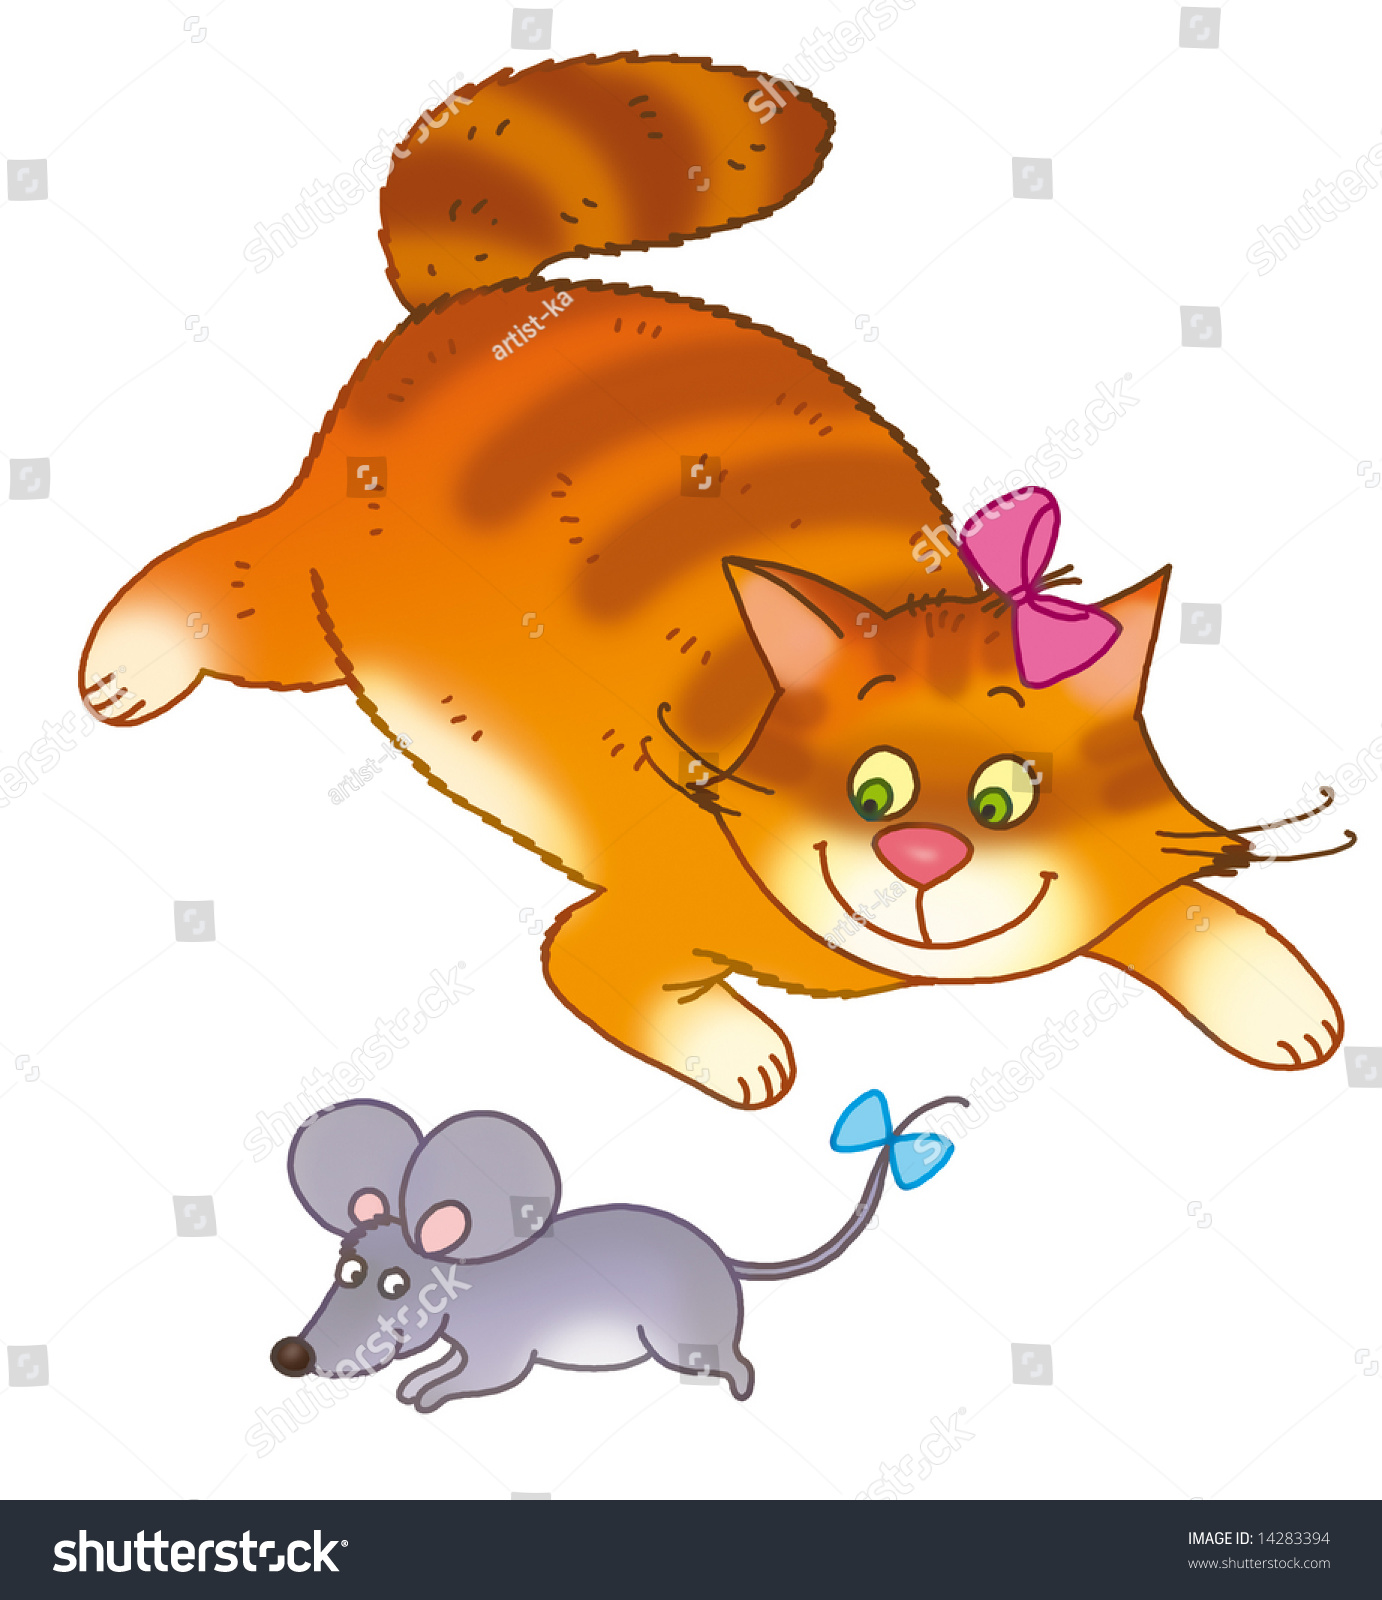 cat and mouse clip art free - photo #43